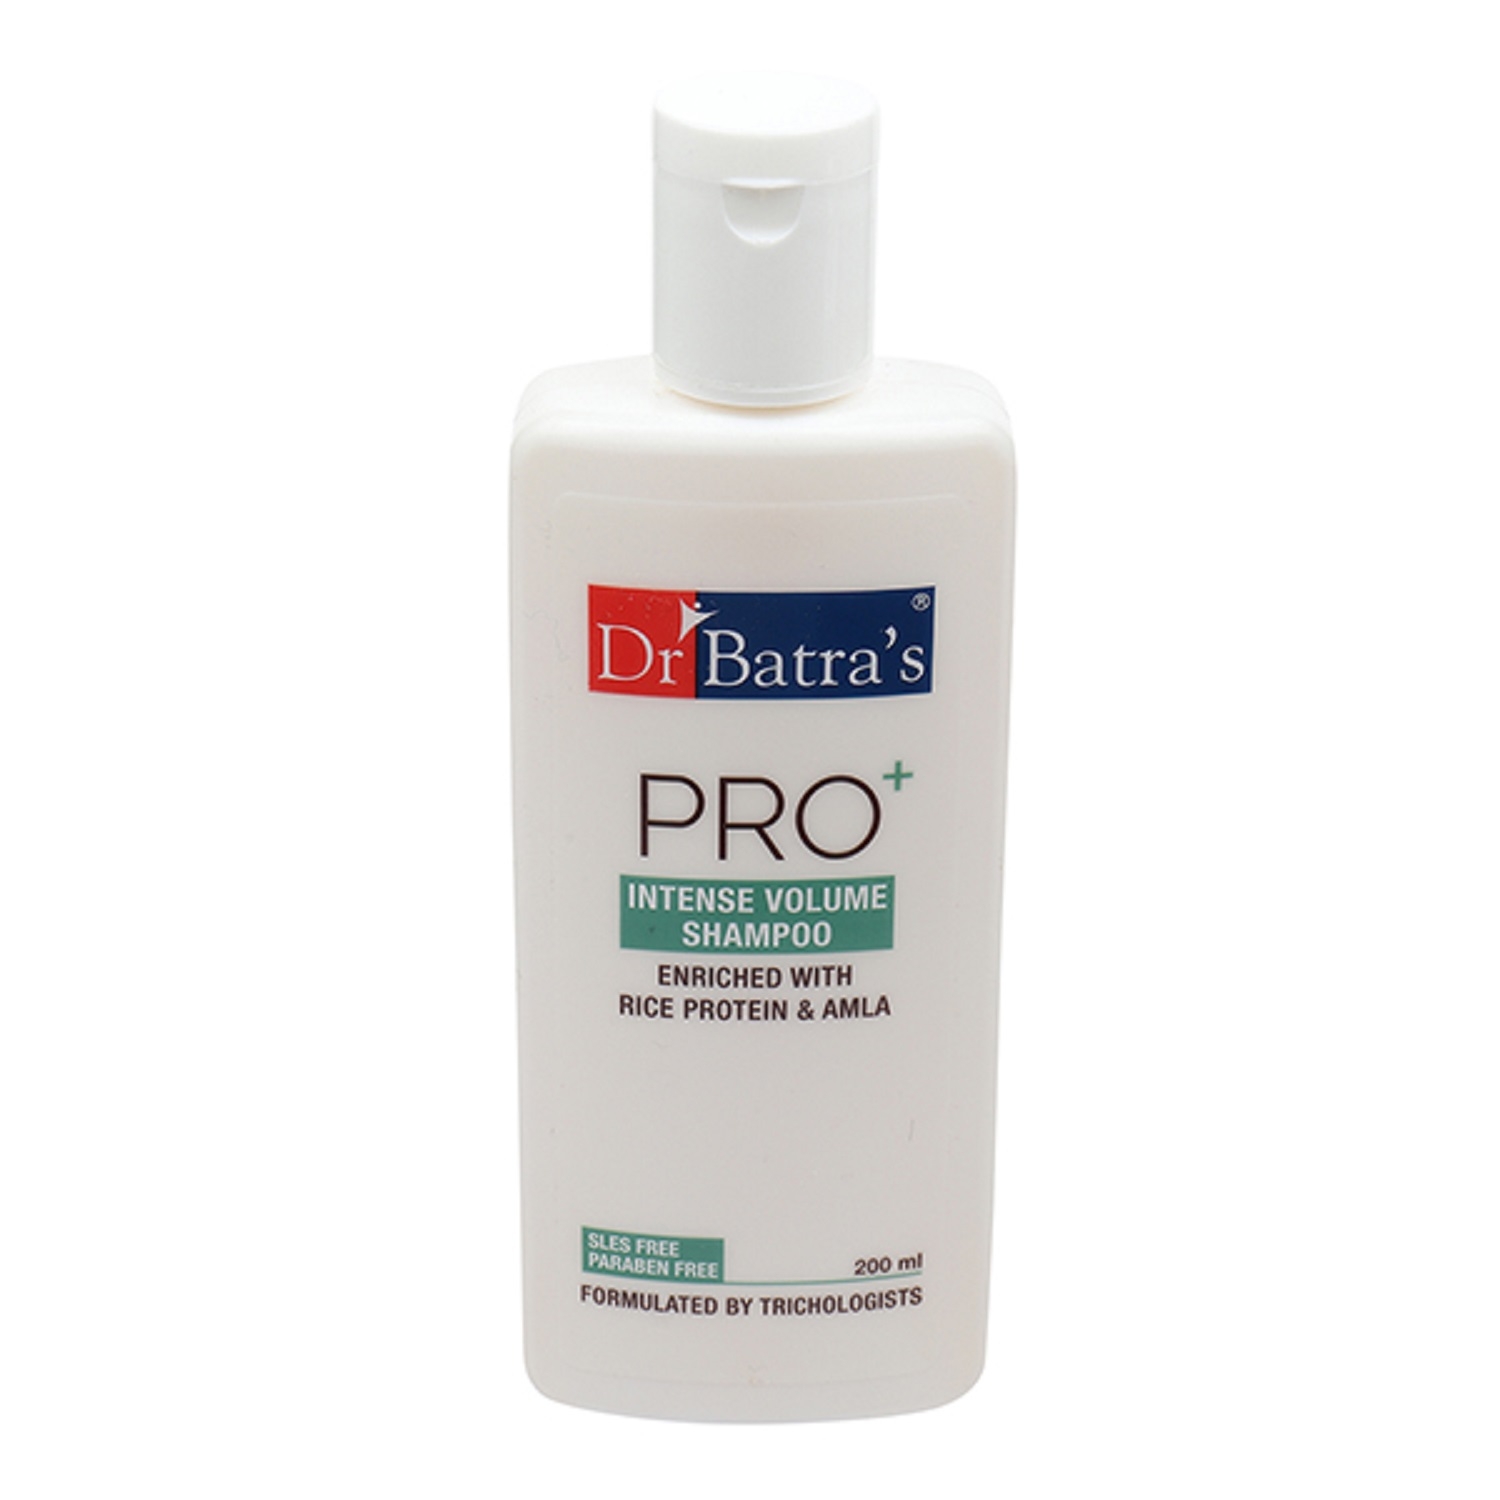 Dr Batra's Pro+ Intense Volume Shampoo Enriched With Rice protein & Amla - 200 ml